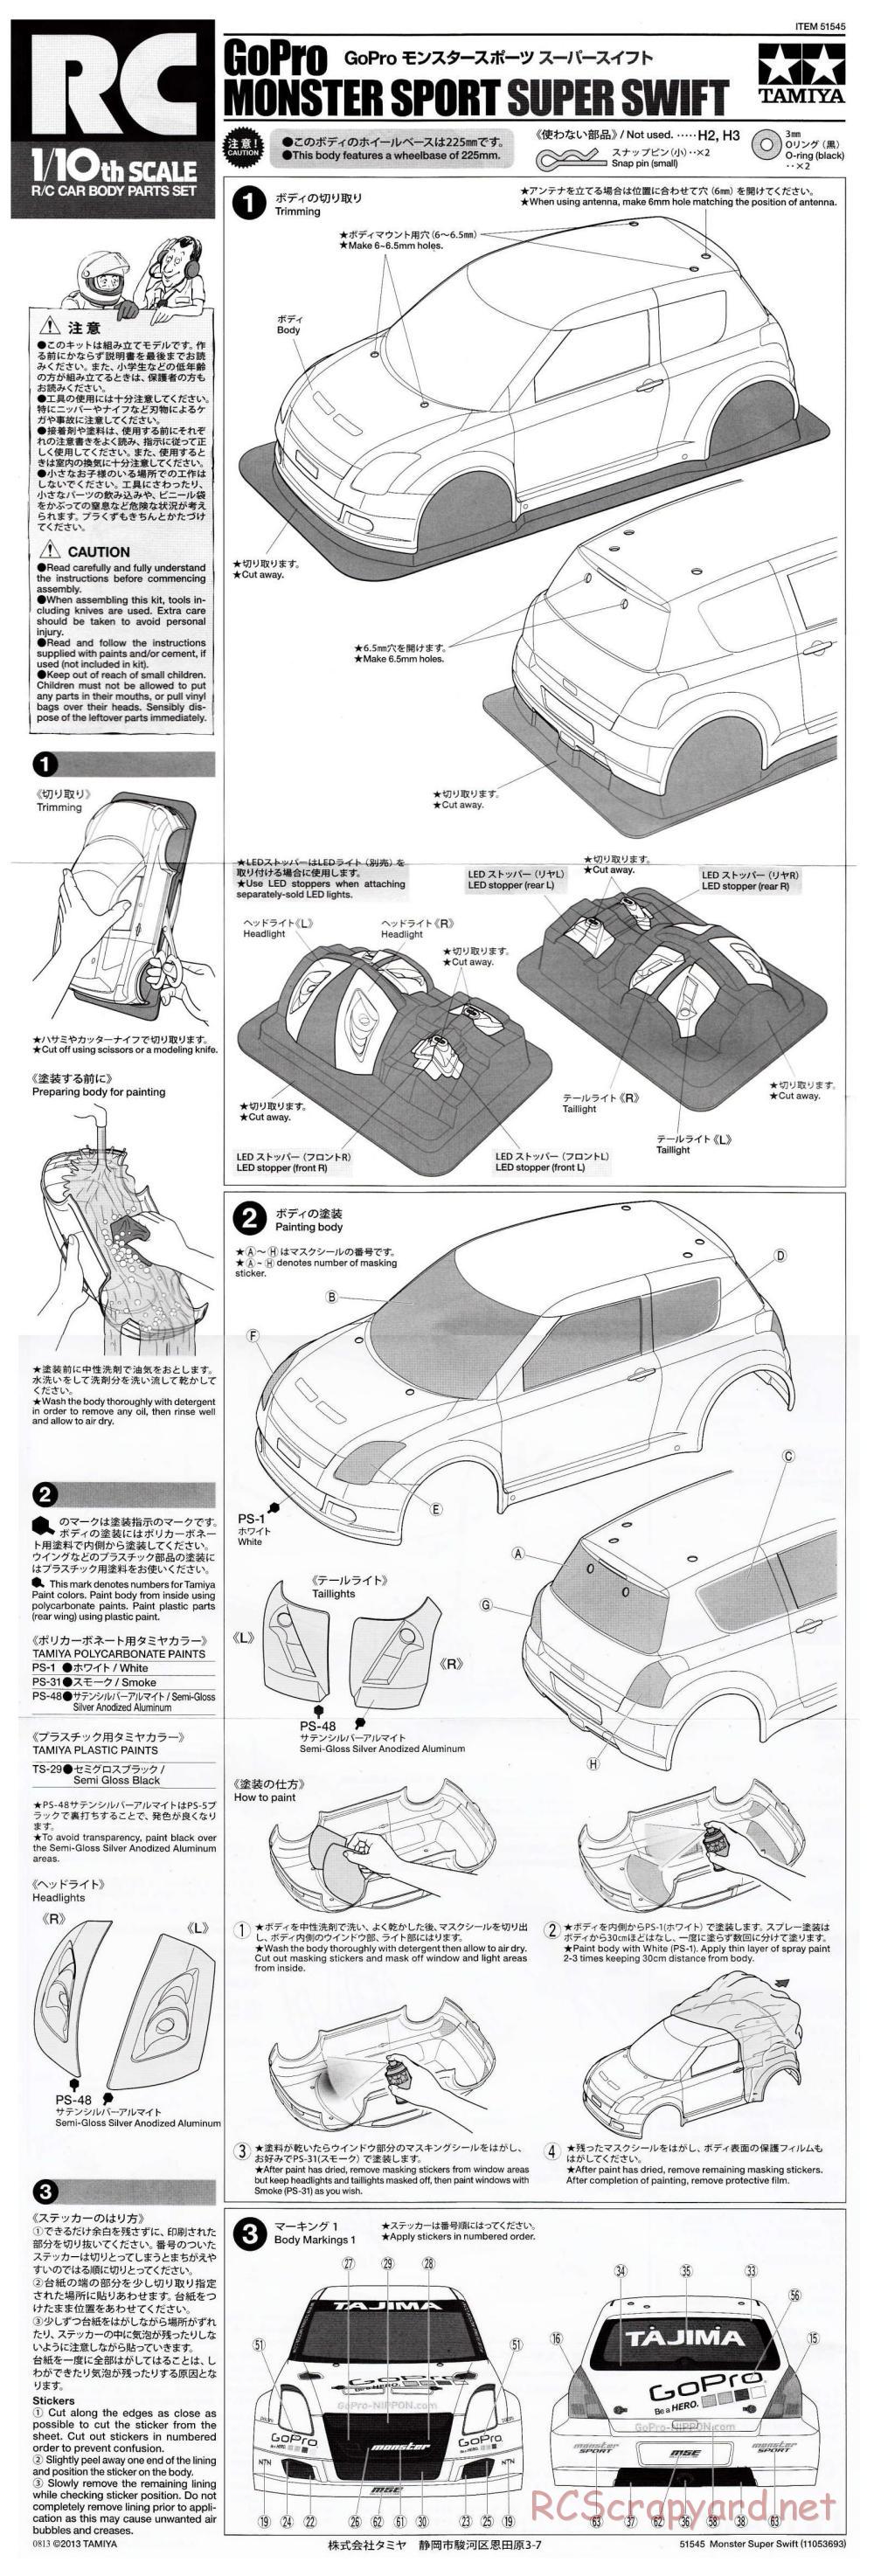 Tamiya - GoPro Monster Sport Super Swift - M-05 Chassis - Body Manual - Page 1